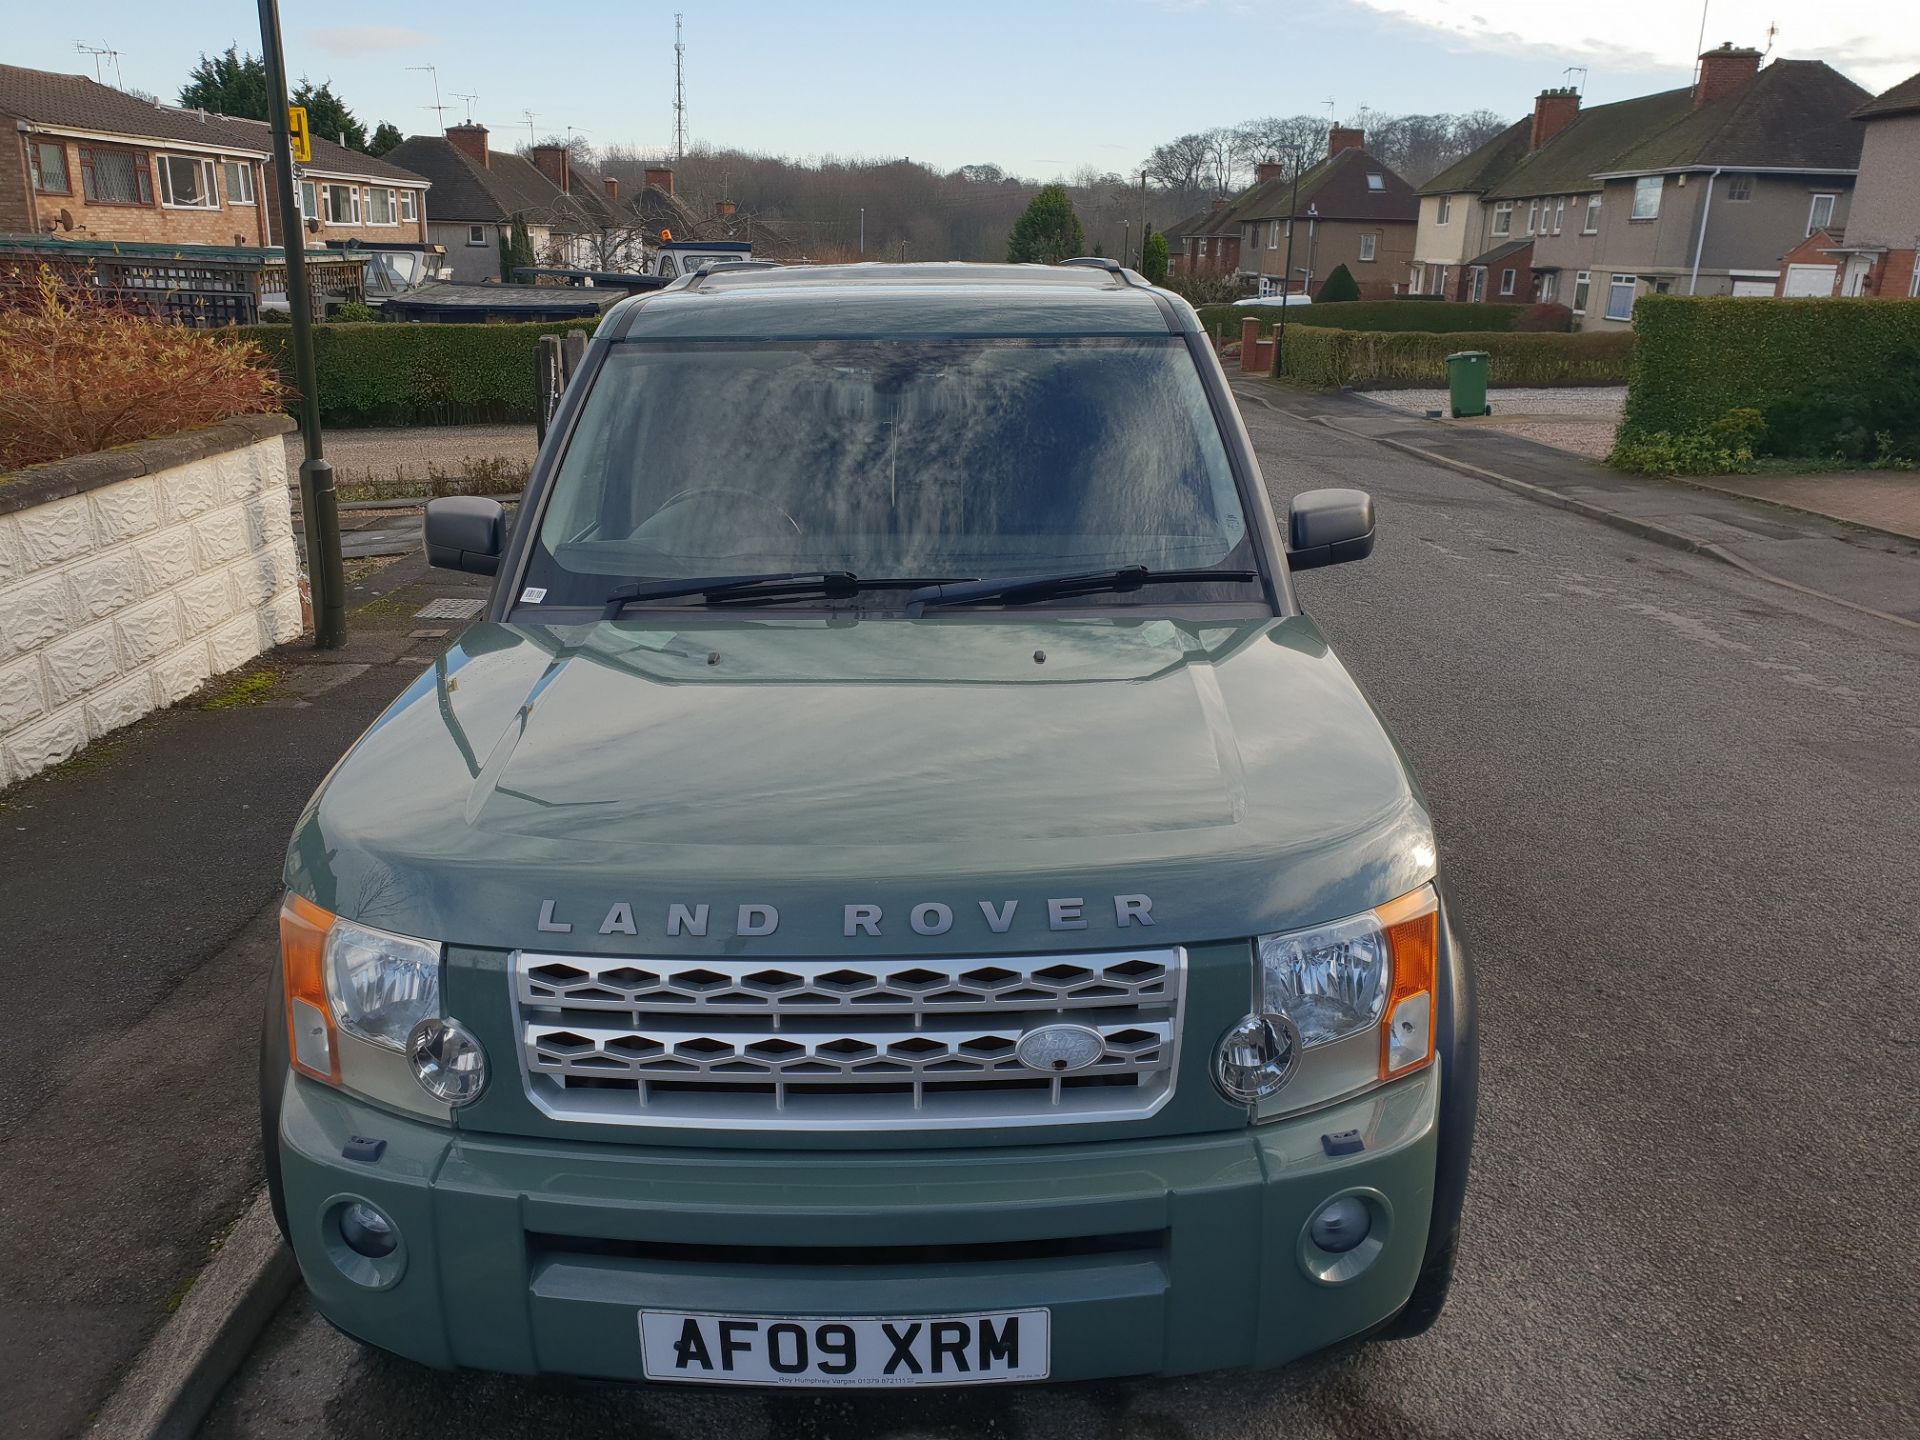 2009/09 REG LAND ROVER DISCOVERY 3 XS MWB DIESEL 4X4, ACTIVE REAR LOCKING DIFF, TOW PACK *PLUS VAT* - Image 3 of 16